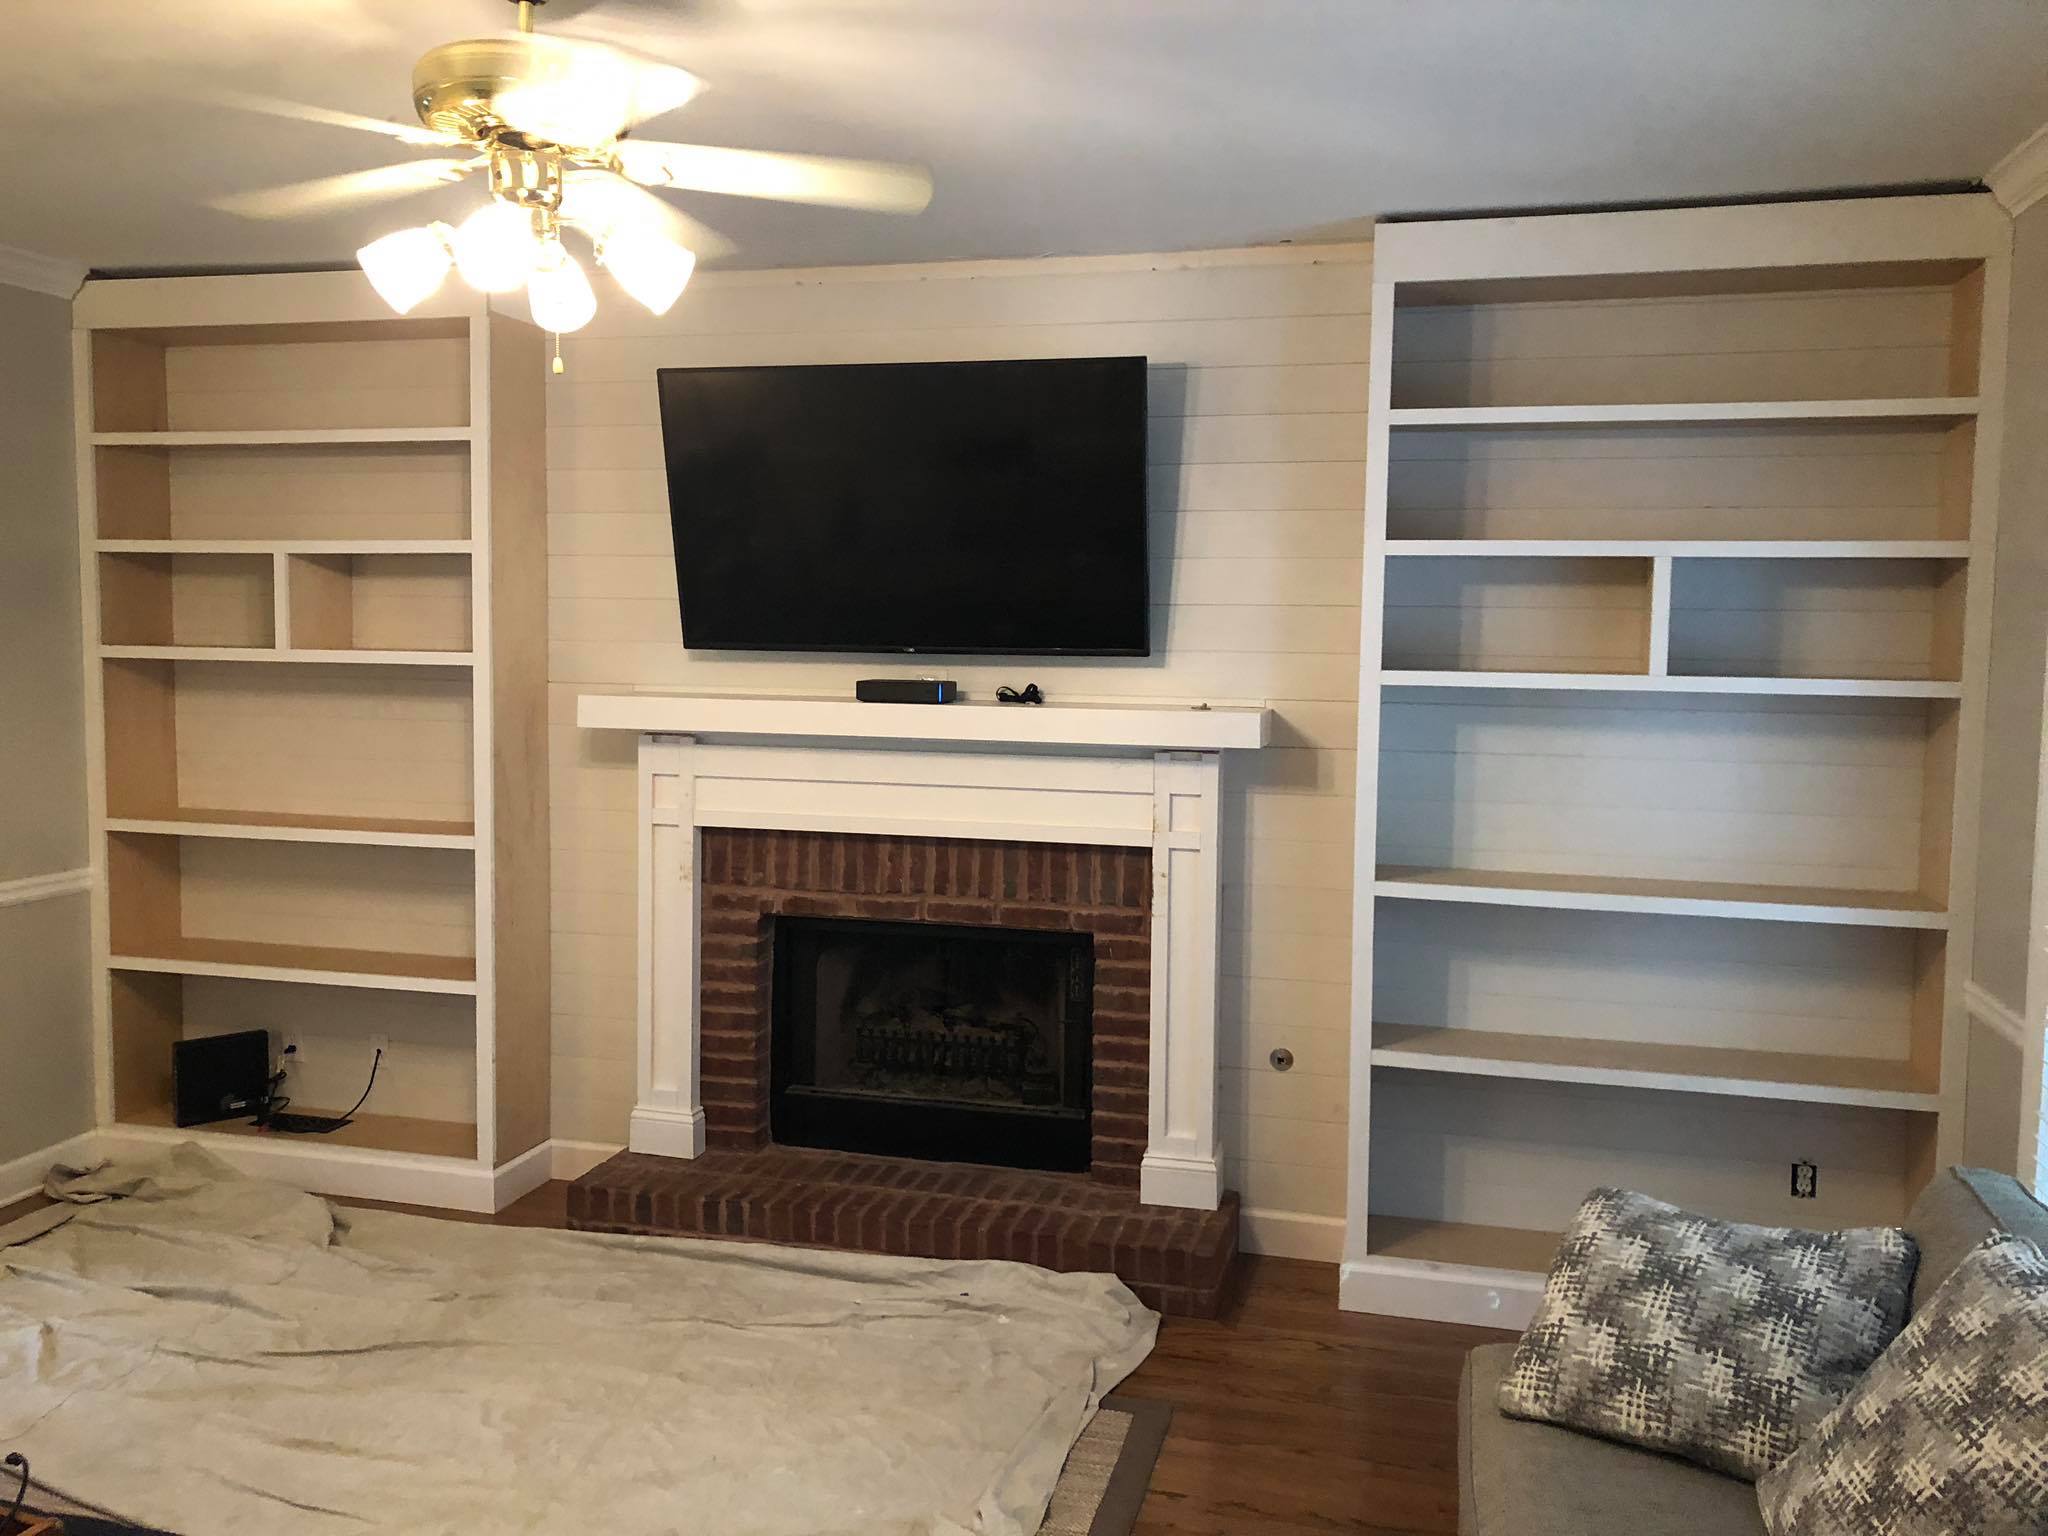 Fireplace Custom Wall High Built in Cabinets Shelves and Trim Painted White Installing 4